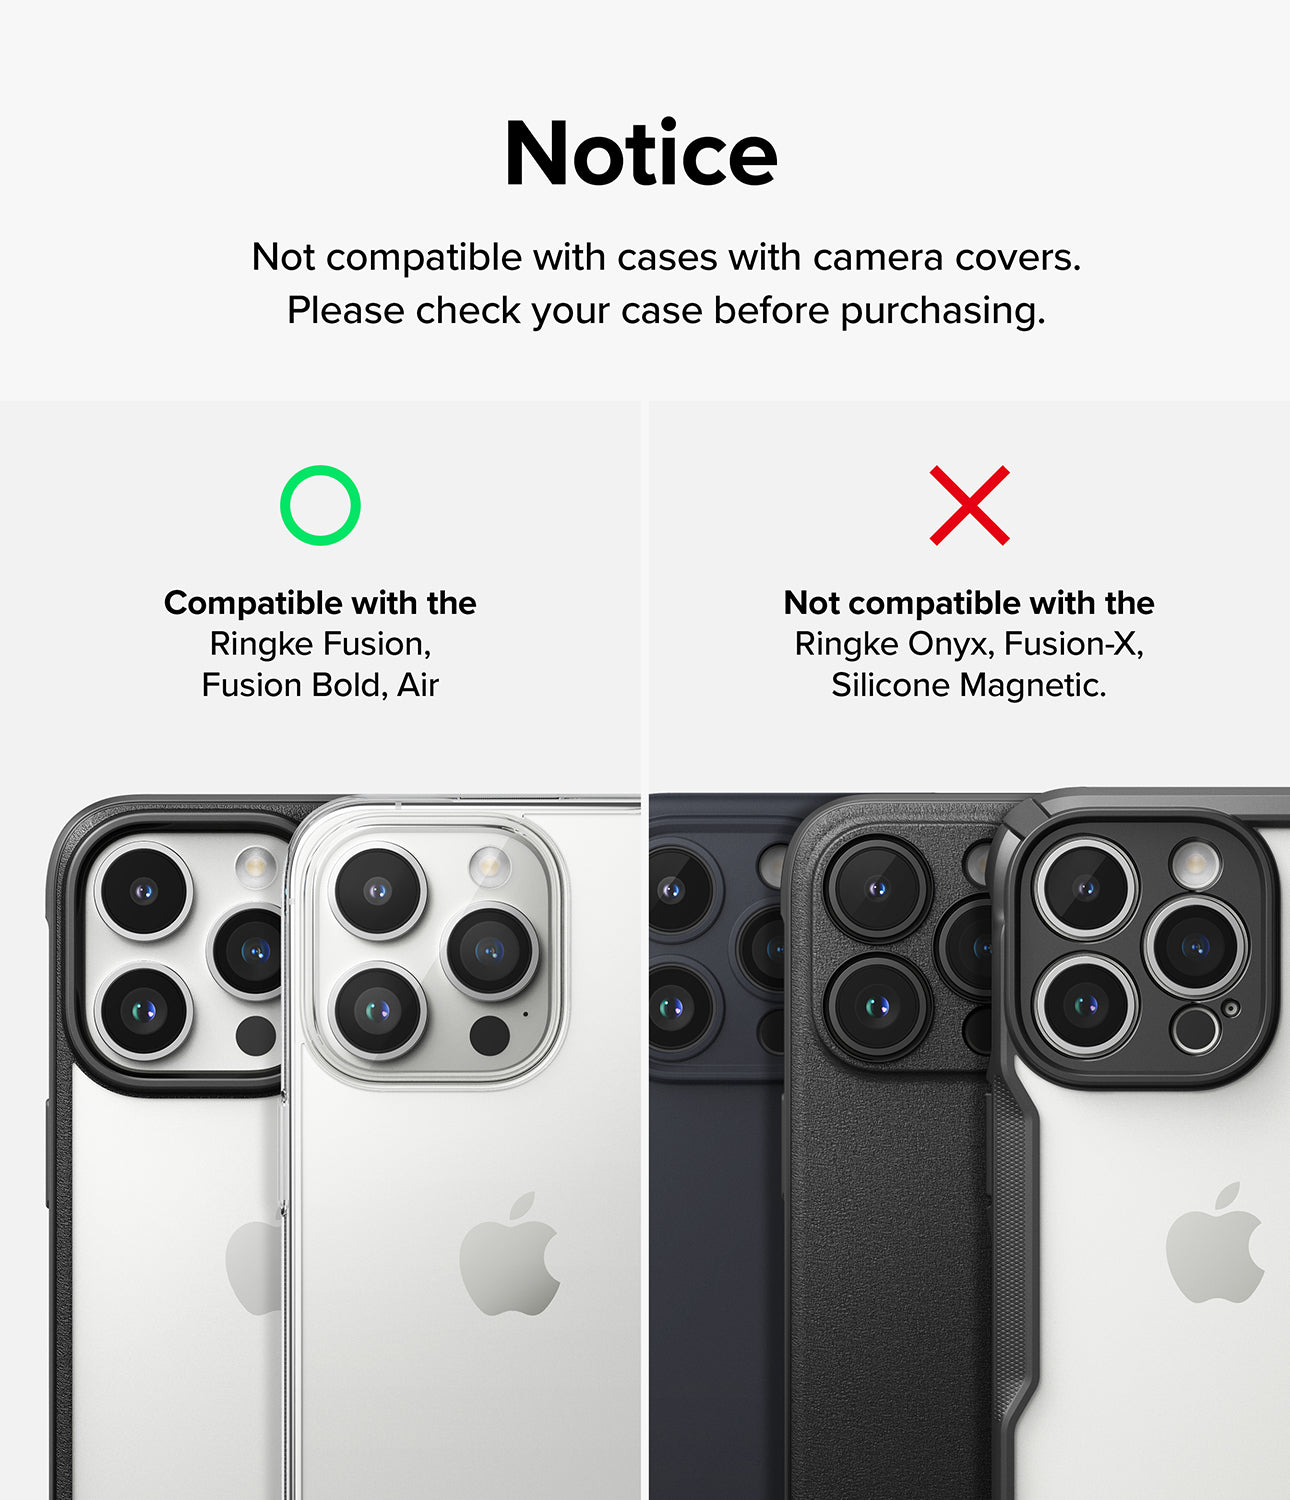 iPhone 15 Pro | Camera Protector Glass [2 Pack] - Notice. Not compatible with cases with camera covers. Please check your case before purchasing.